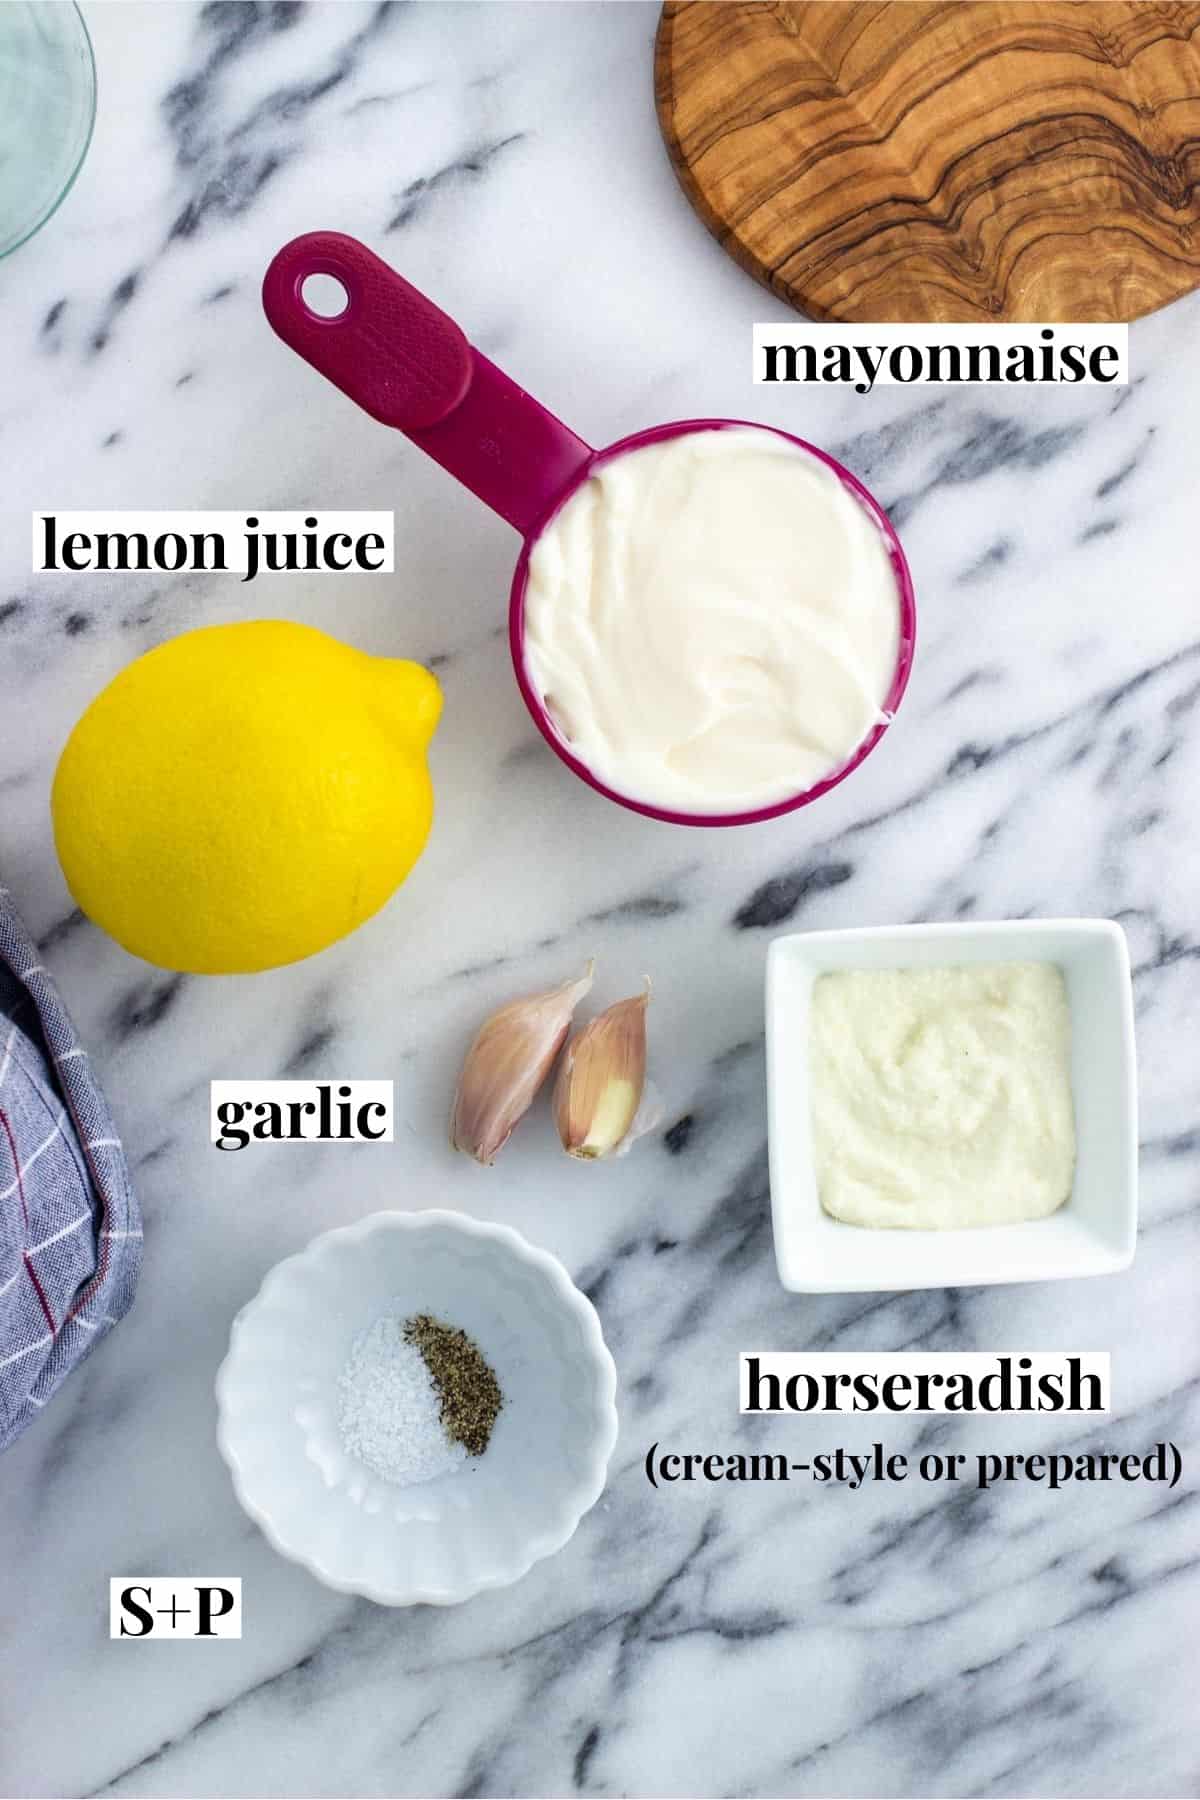 Labeled horseradish aioli ingredients on a marble board.